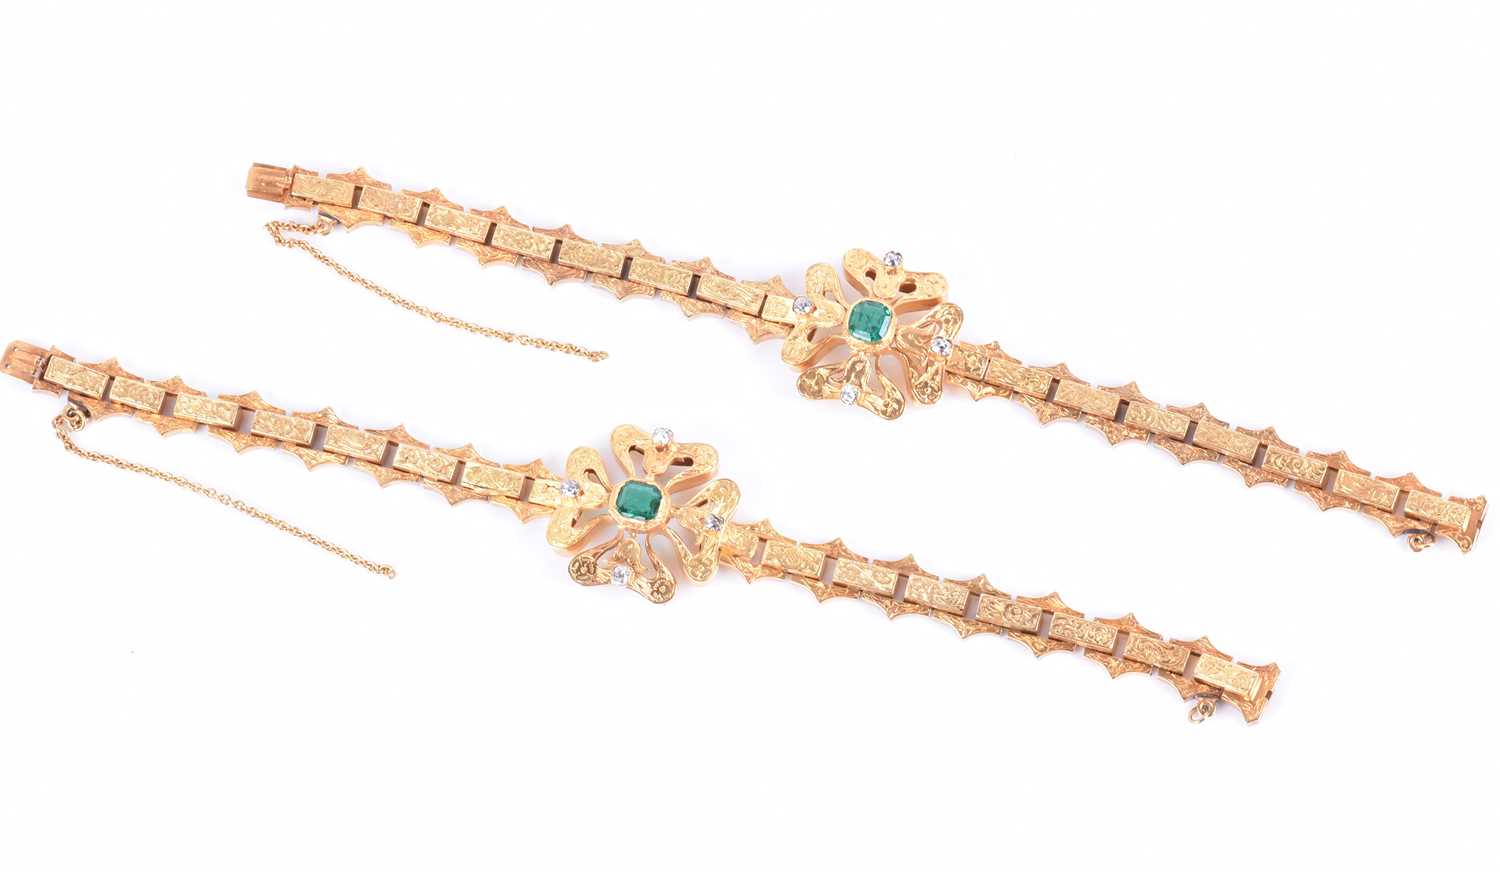 A fine pair of mid to late Victorian yellow gold, diamond, and emerald braceletseach with a